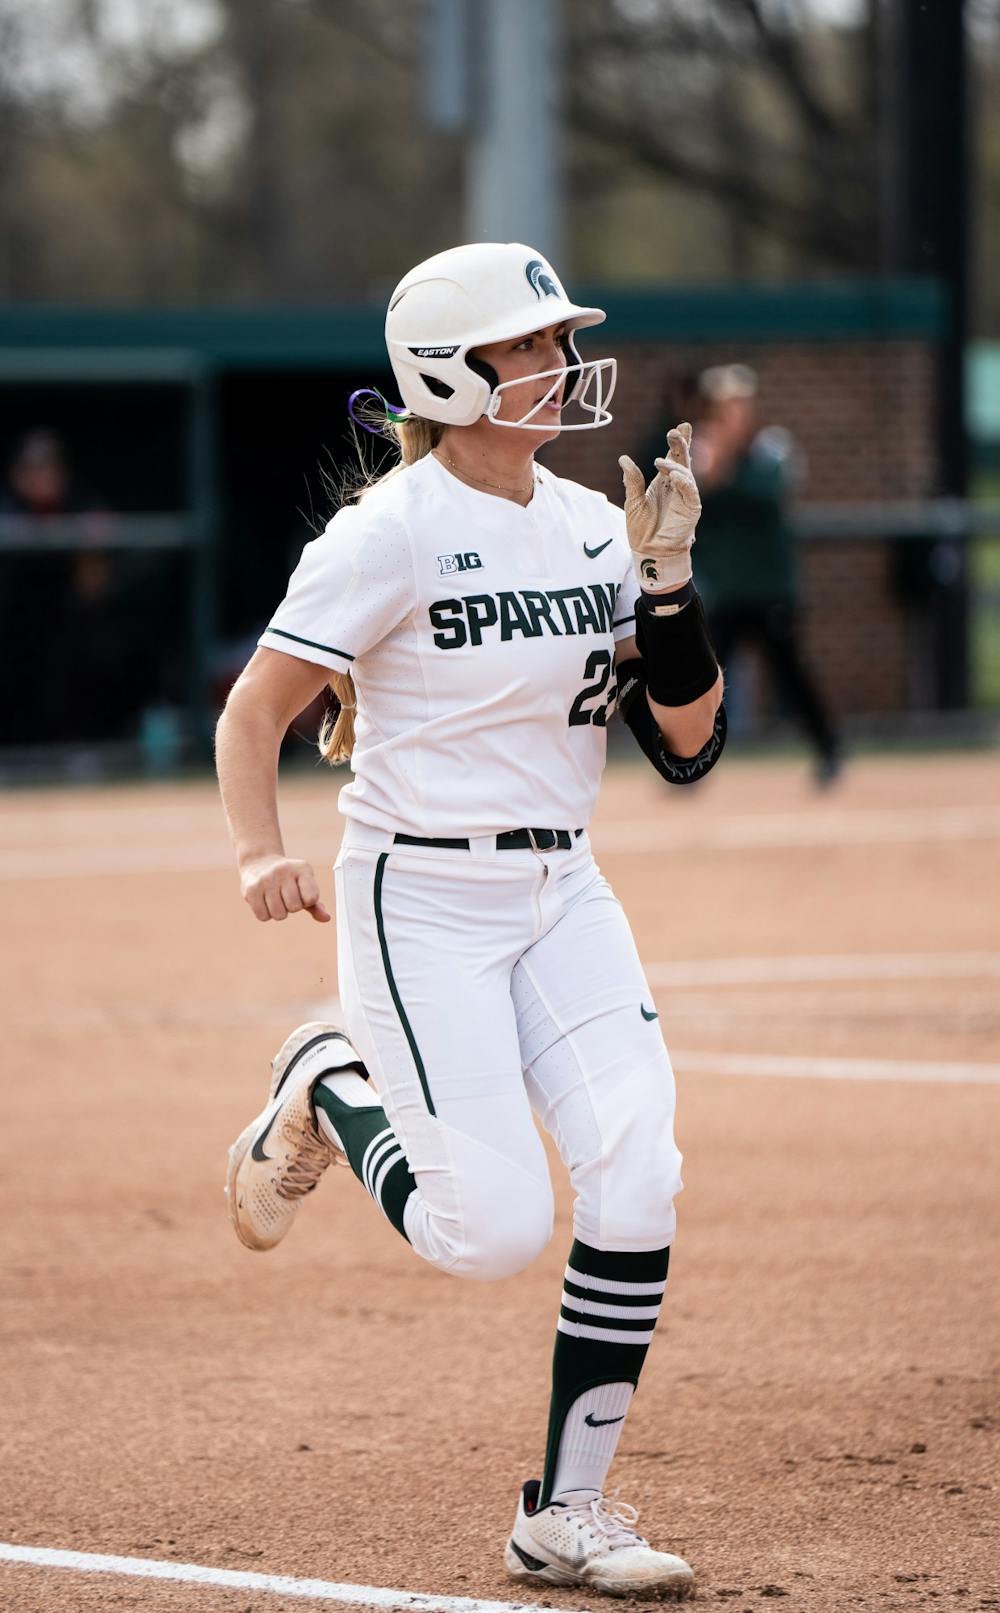 <p>Senior Jessica Mabrey sprints to first base during their match against Maryland on April 29th, 2022. </p>